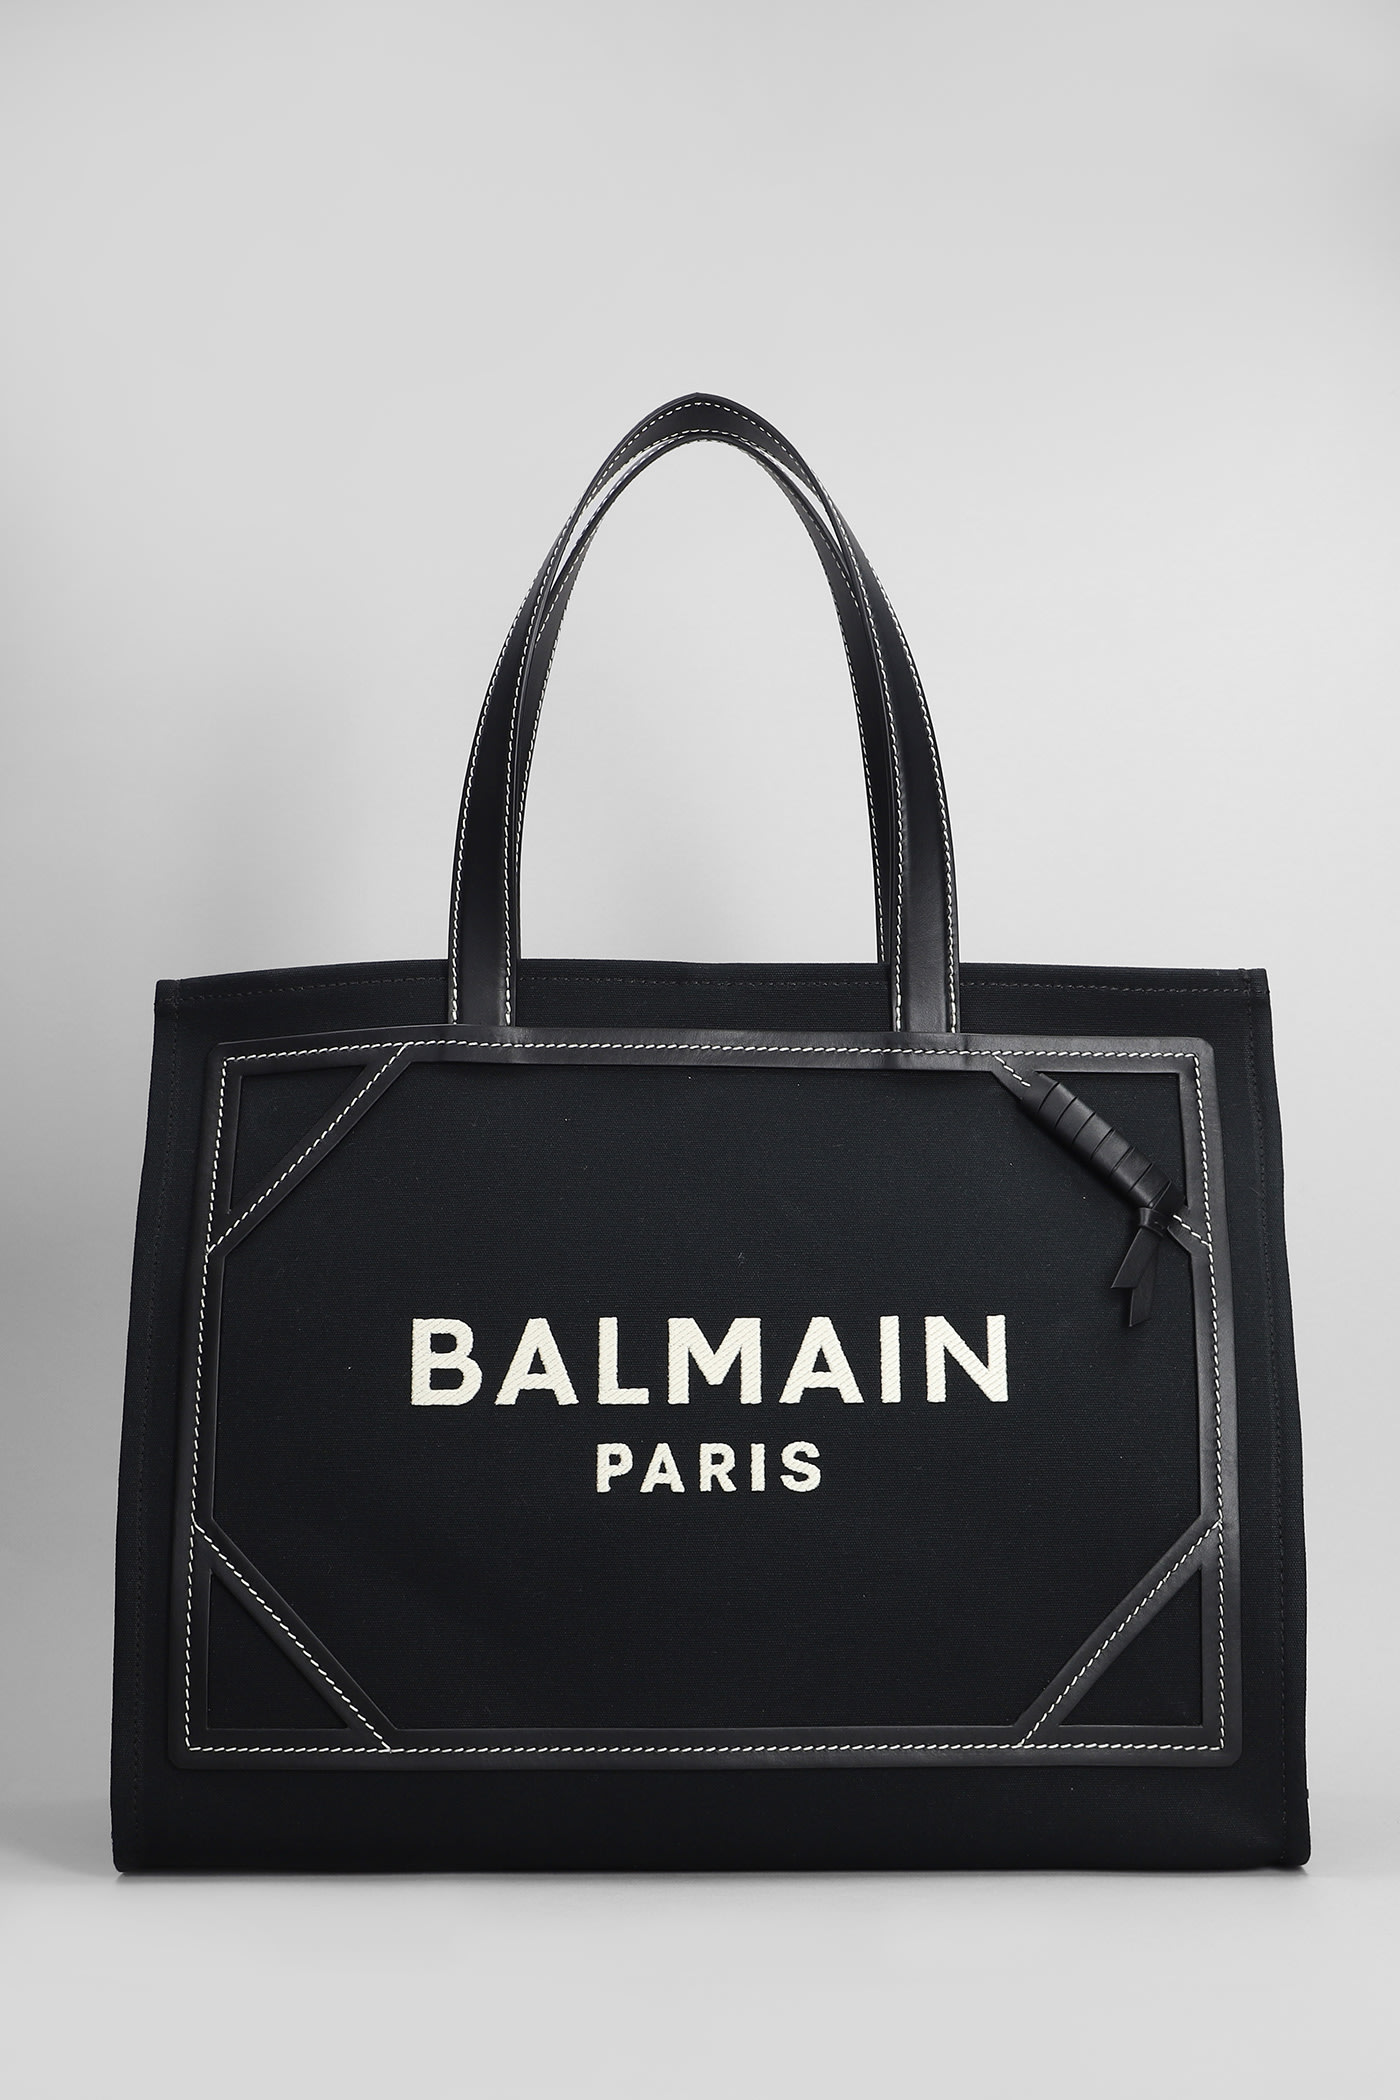 B Army Tote In Black Leather And Fabric